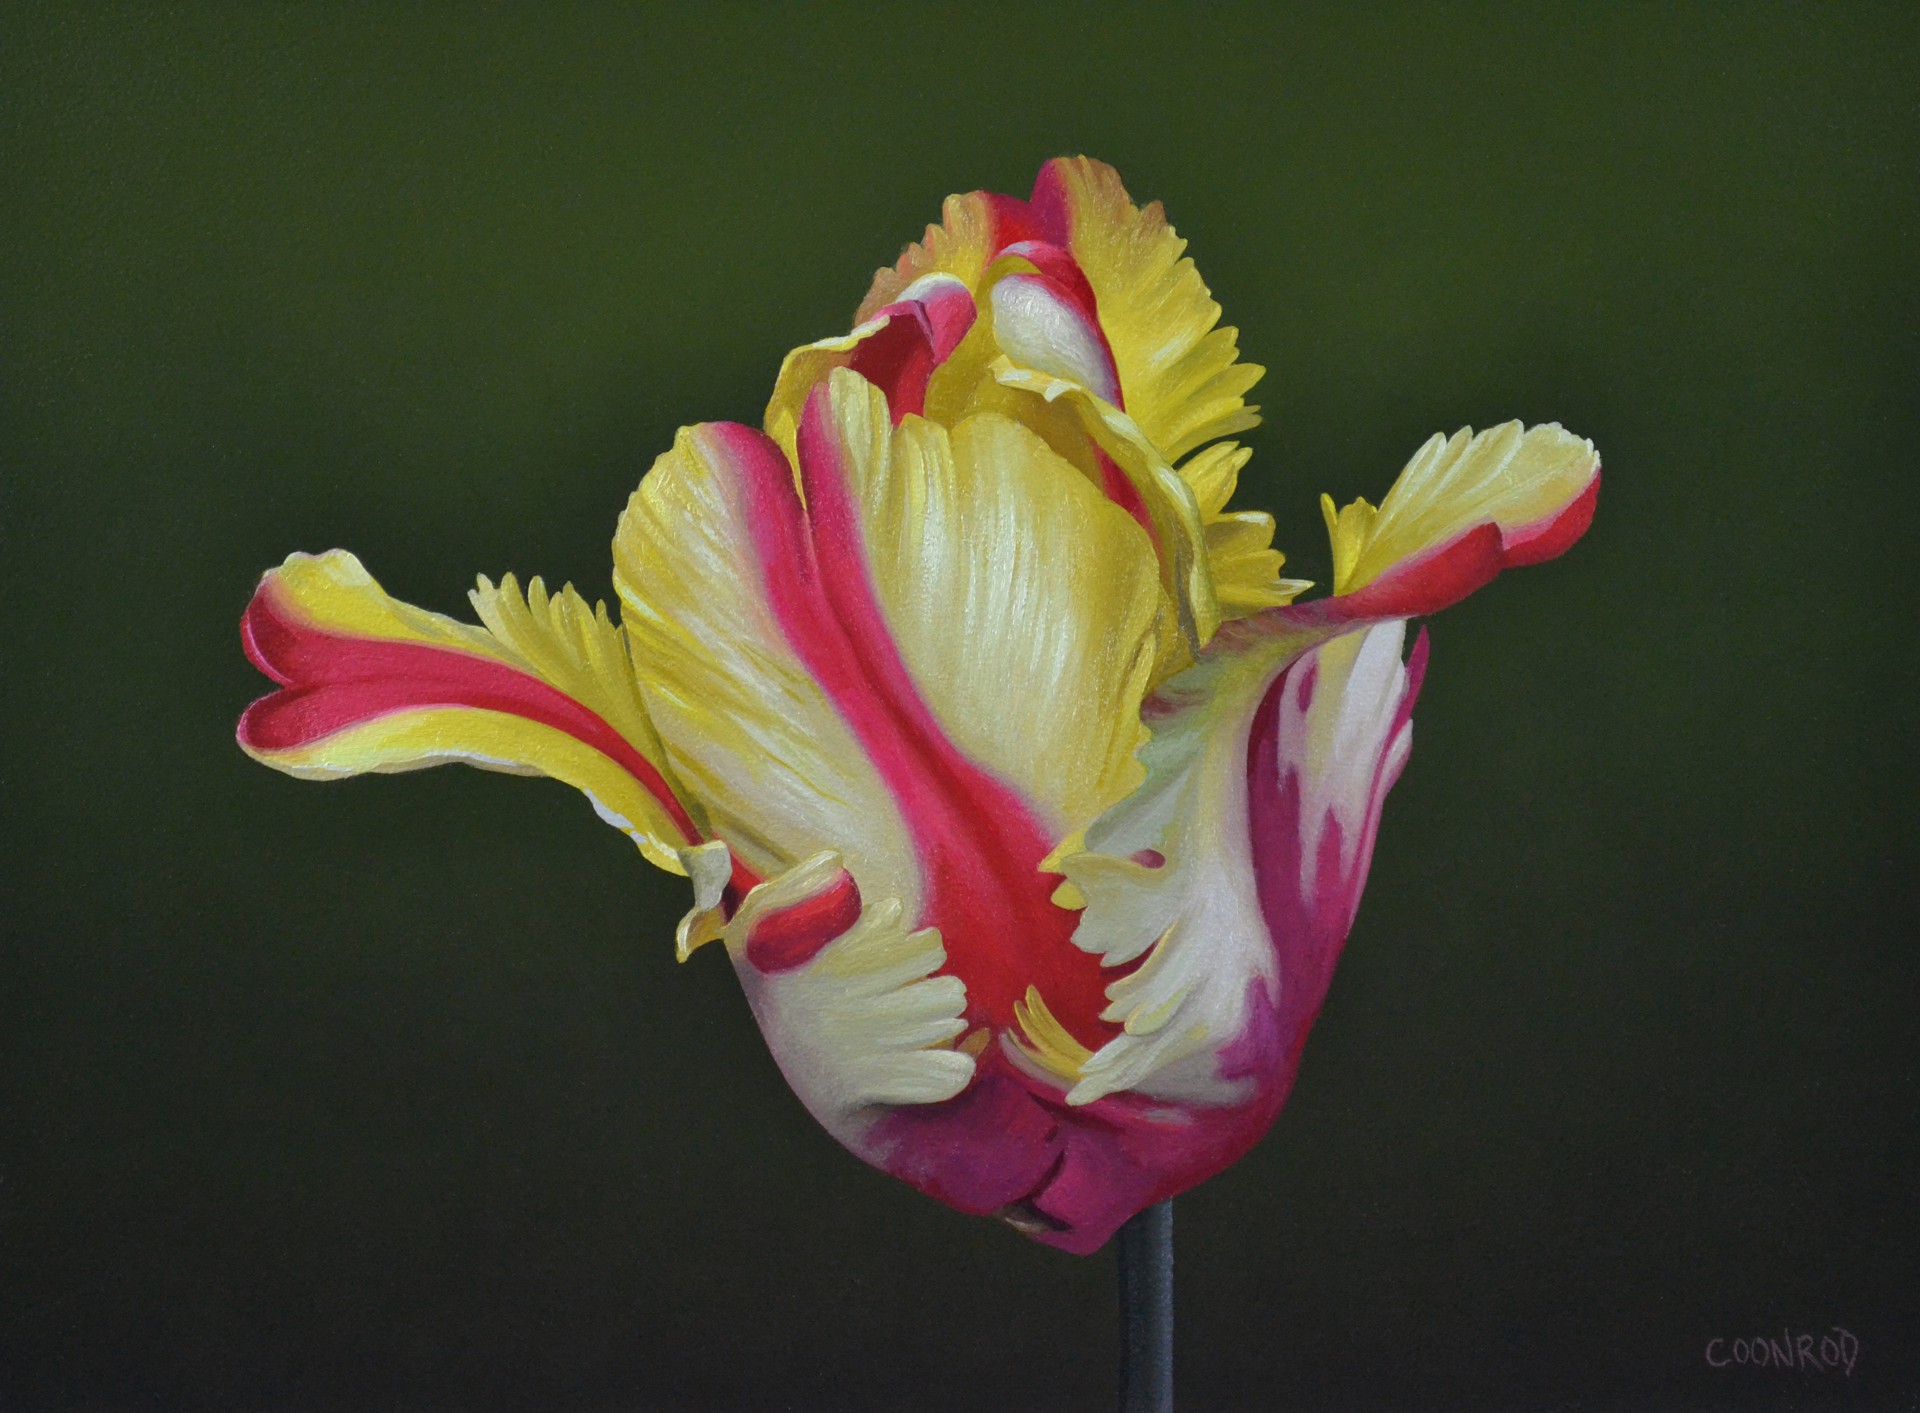 Parrot Tulip by Trish Coonrod